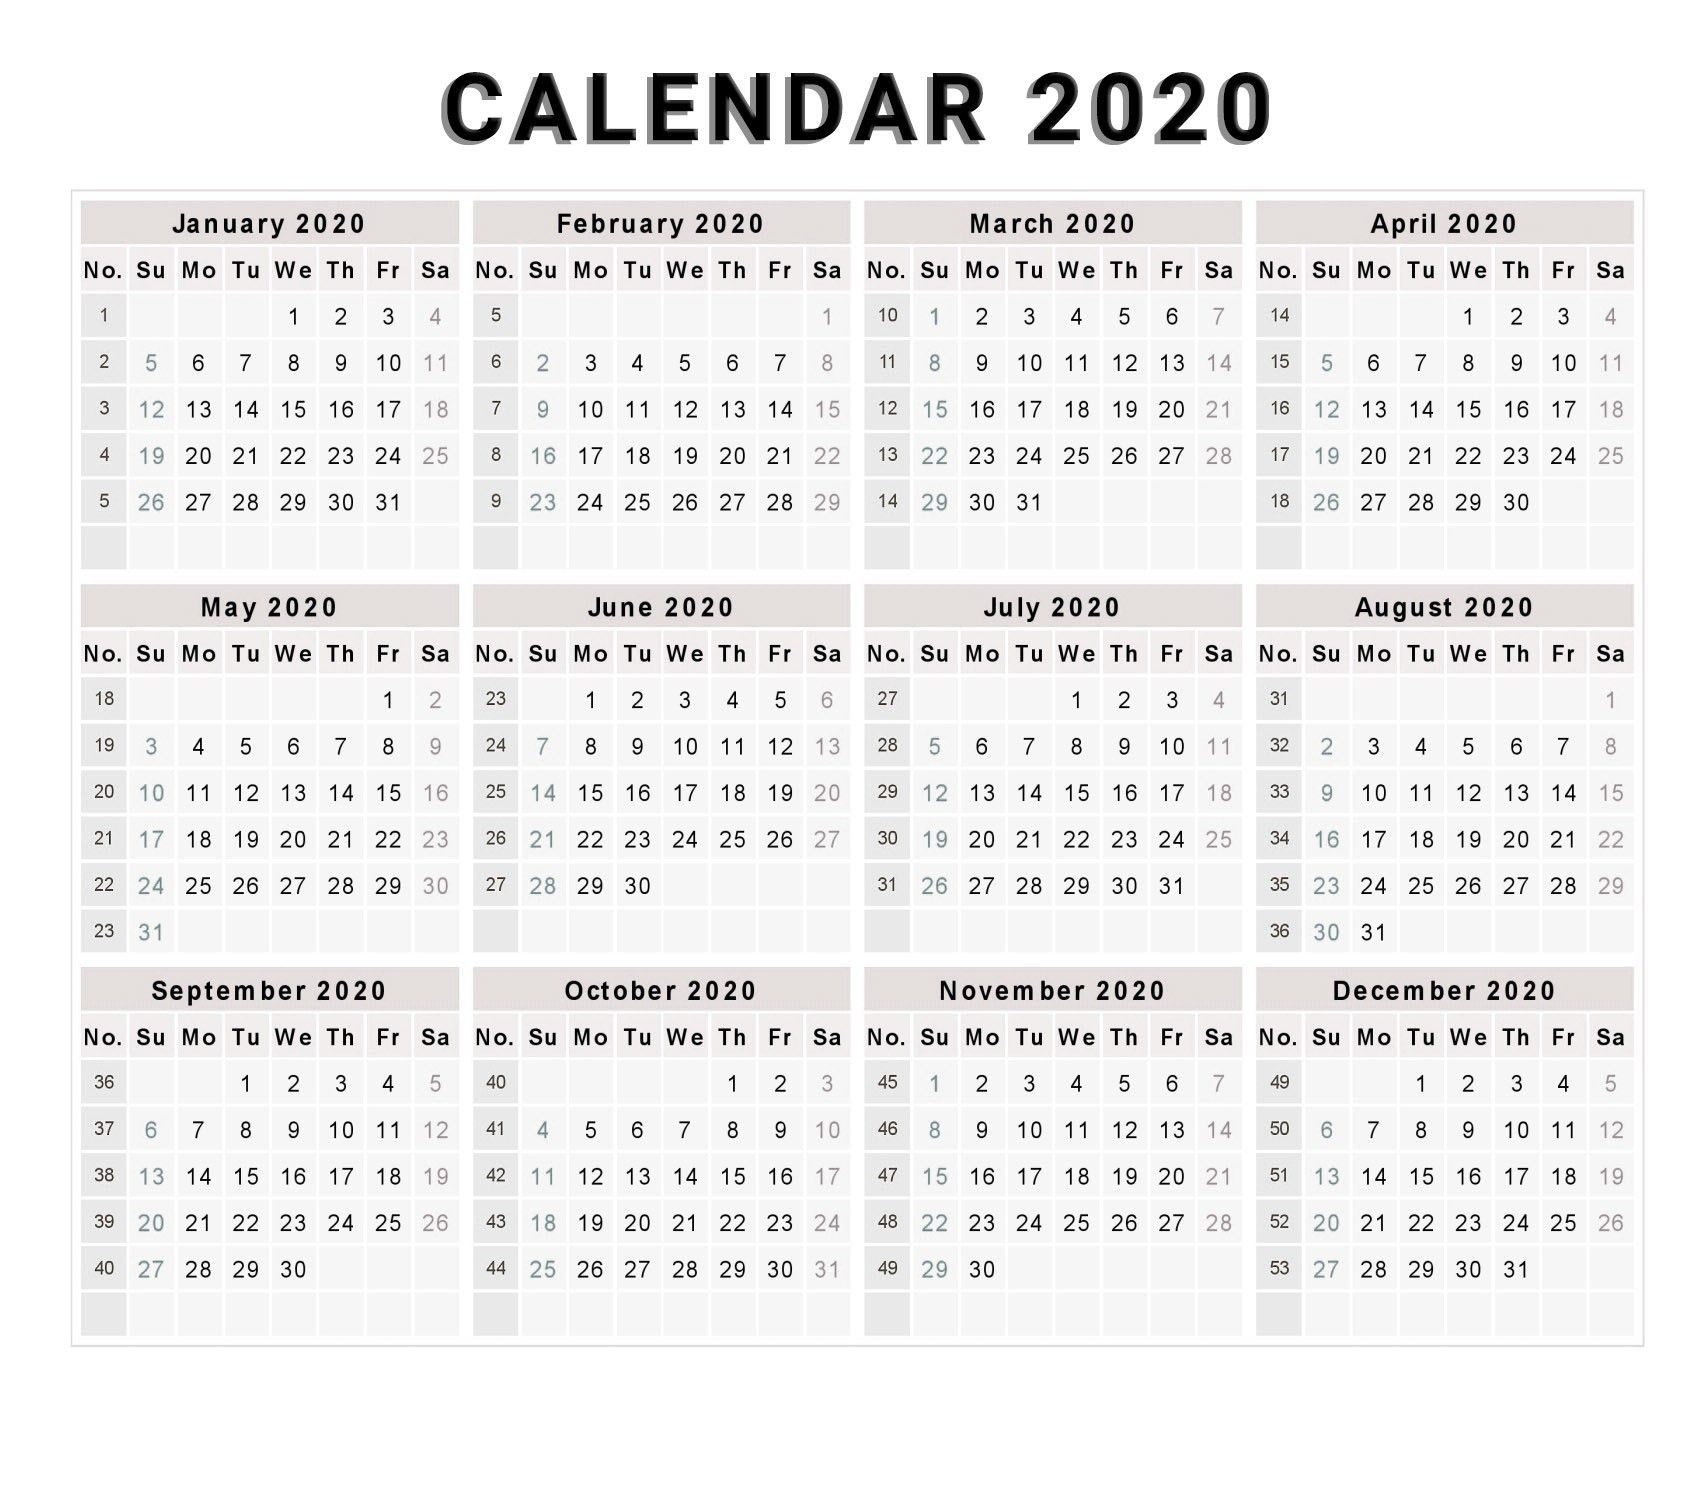 Calendar 2020 Free Printable Calendar 2020 Free 2020 Calendar 2020 Only Printable Yearly